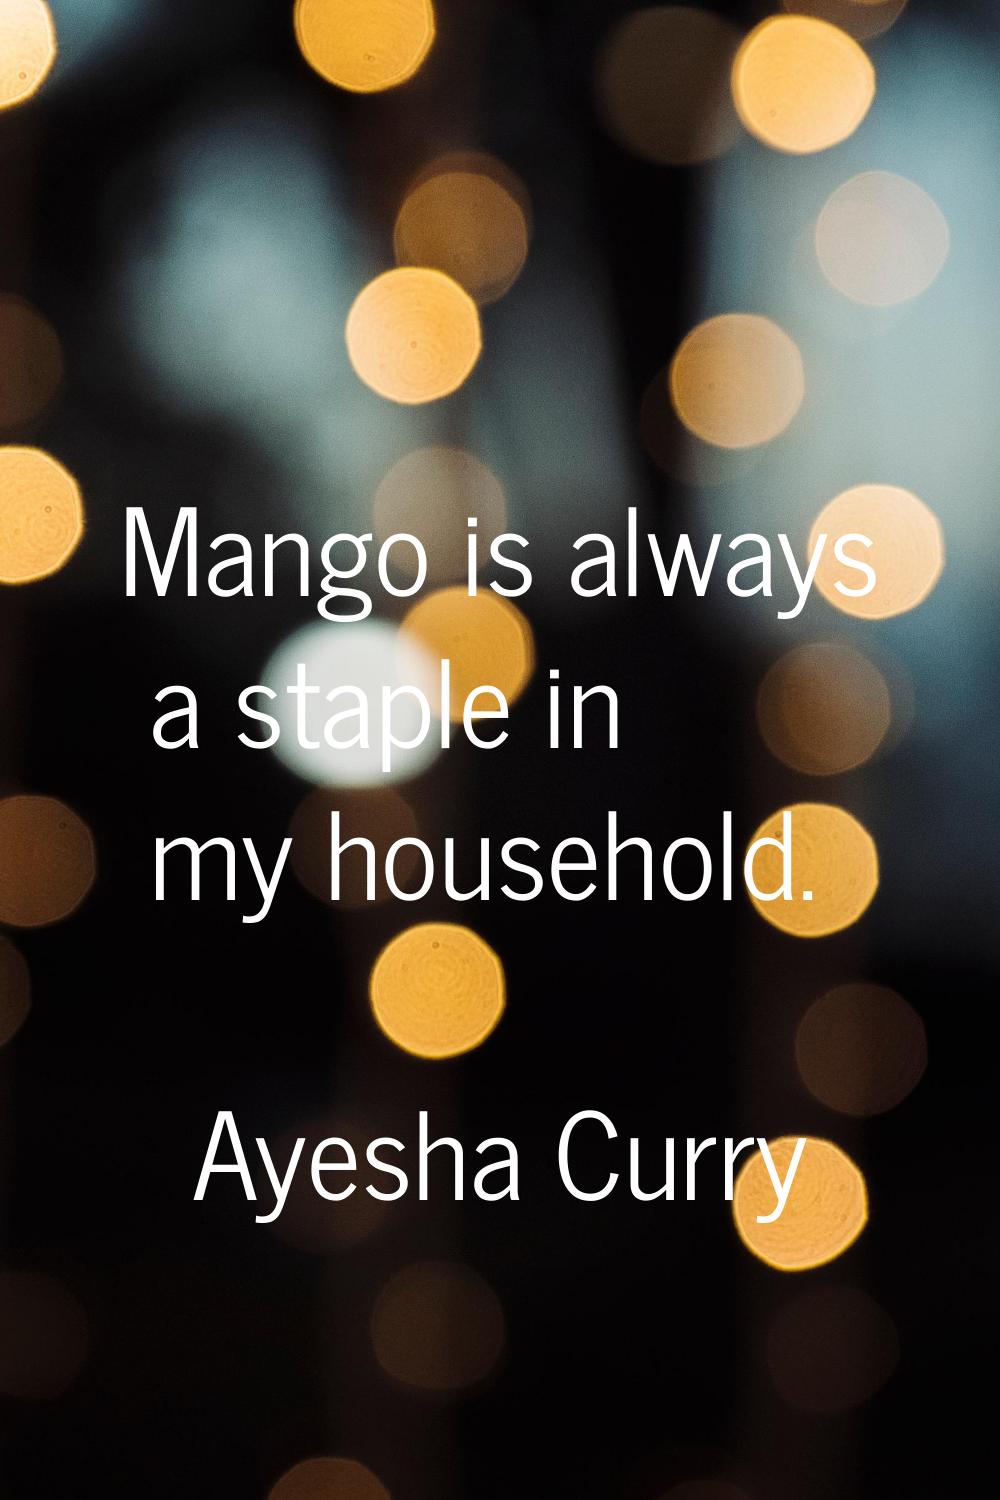 Mango is always a staple in my household.